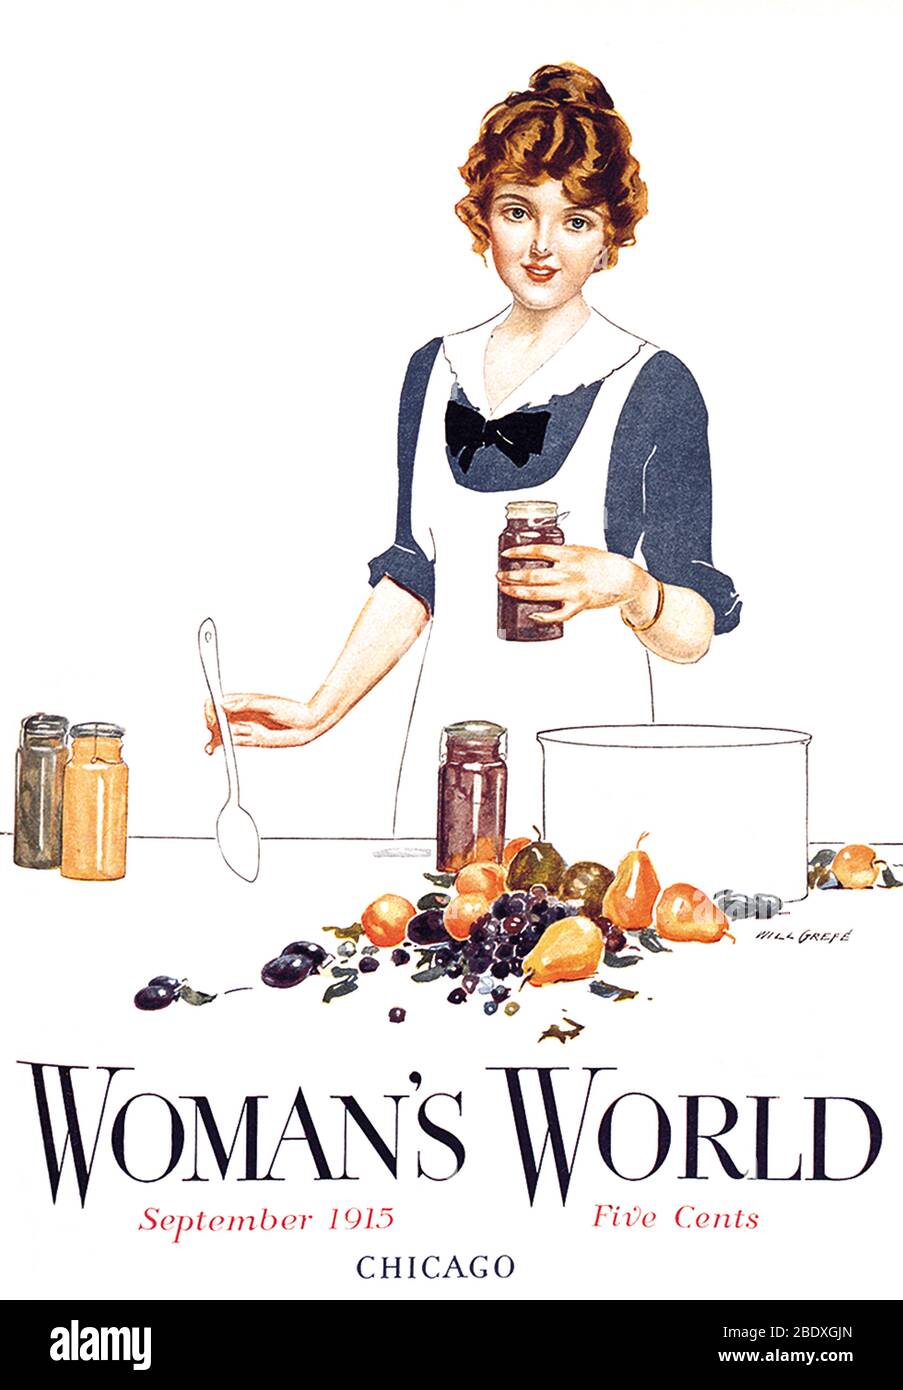 Woman's World, Home Canning, 1915 Stockfoto